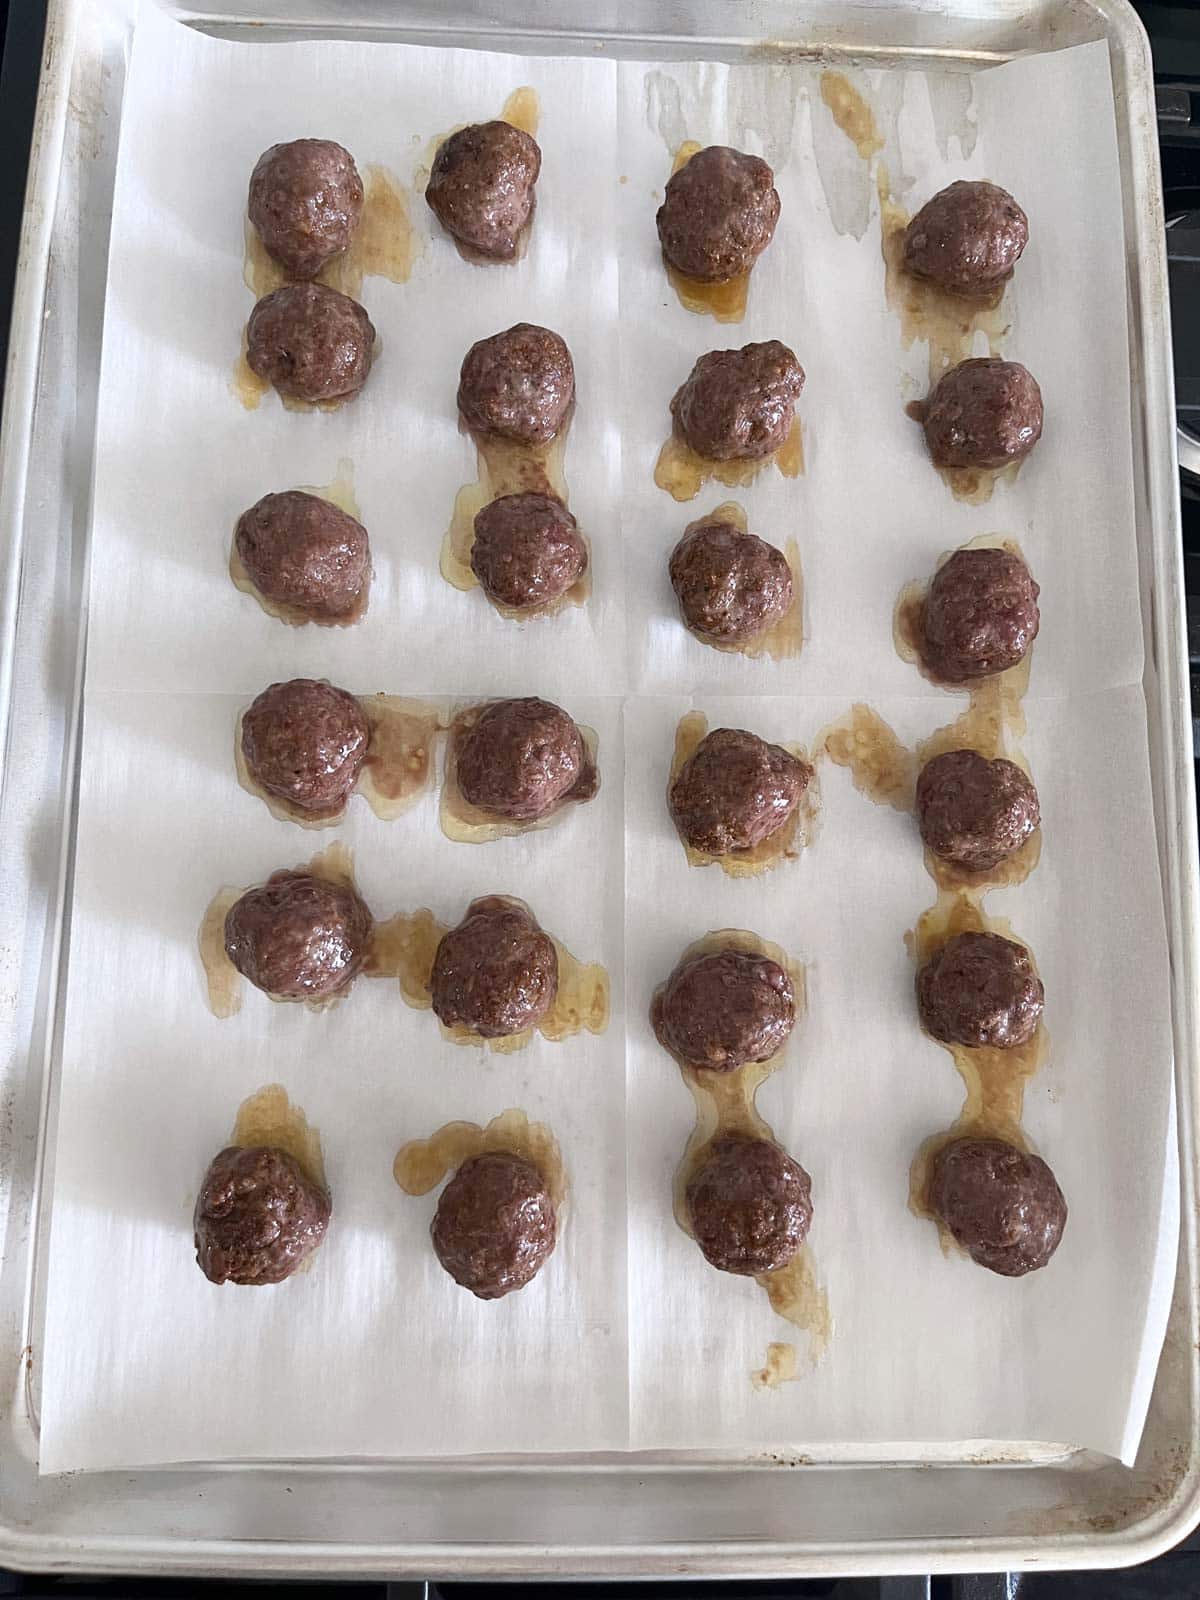 The baked meatballs are on the baking sheet.